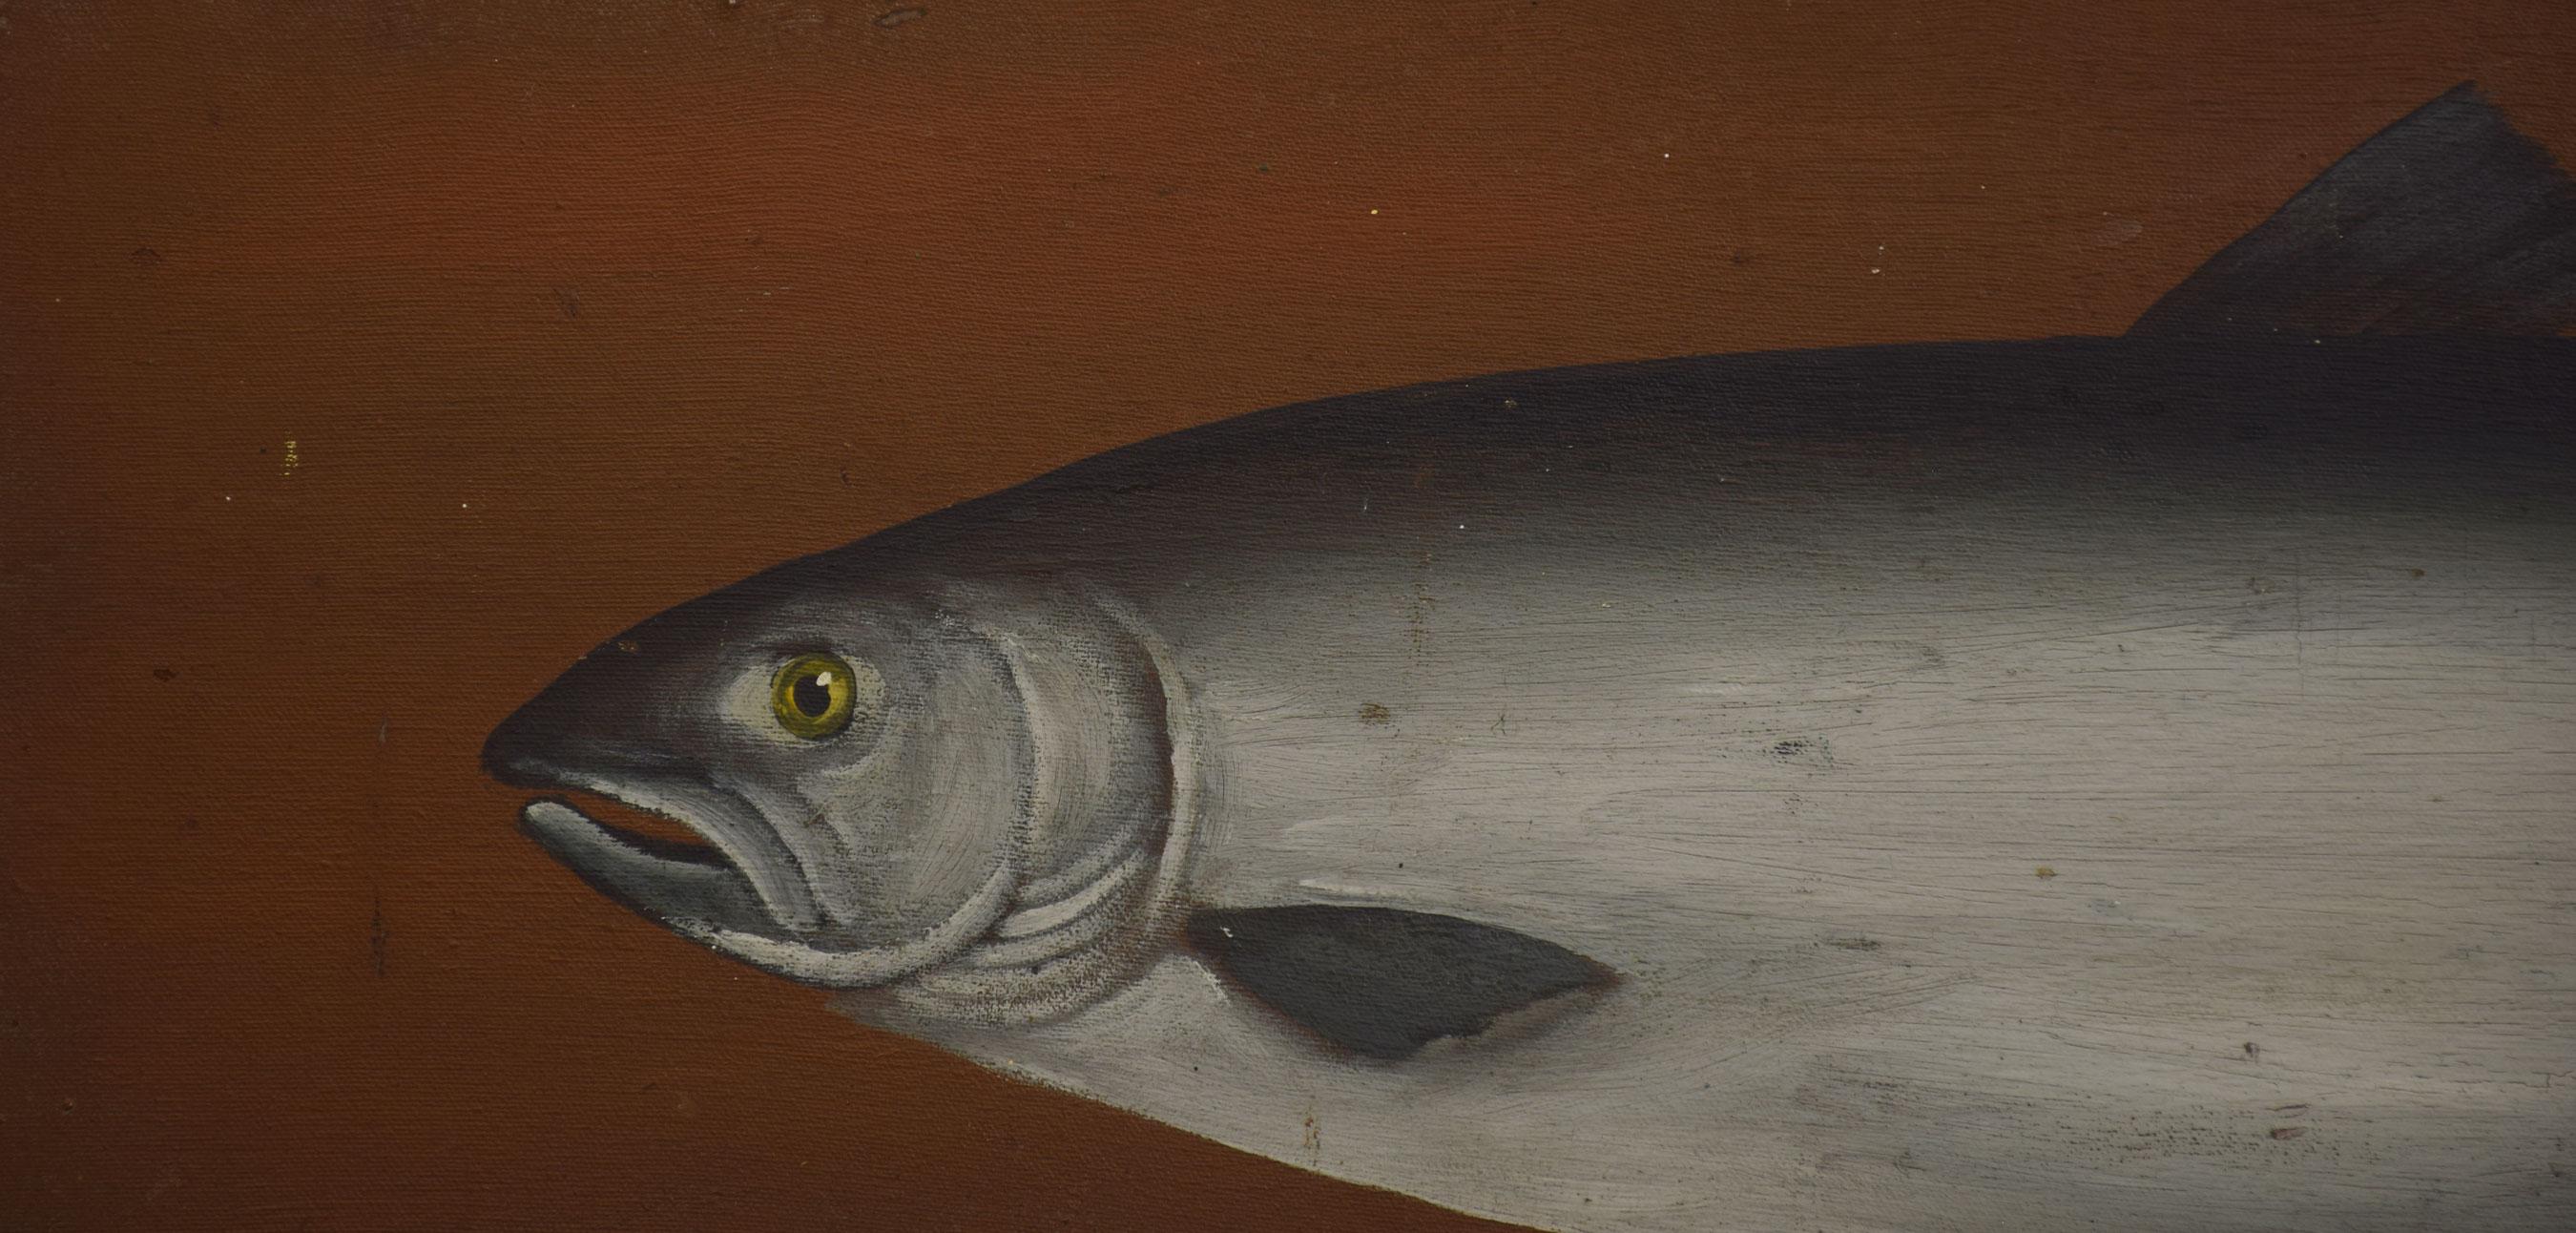 Study of a salmon, oil on canvas, mounted on a board.
Dimensions
Height 14 Inches
Width 41.5 Inches
Depth 1 Inches.